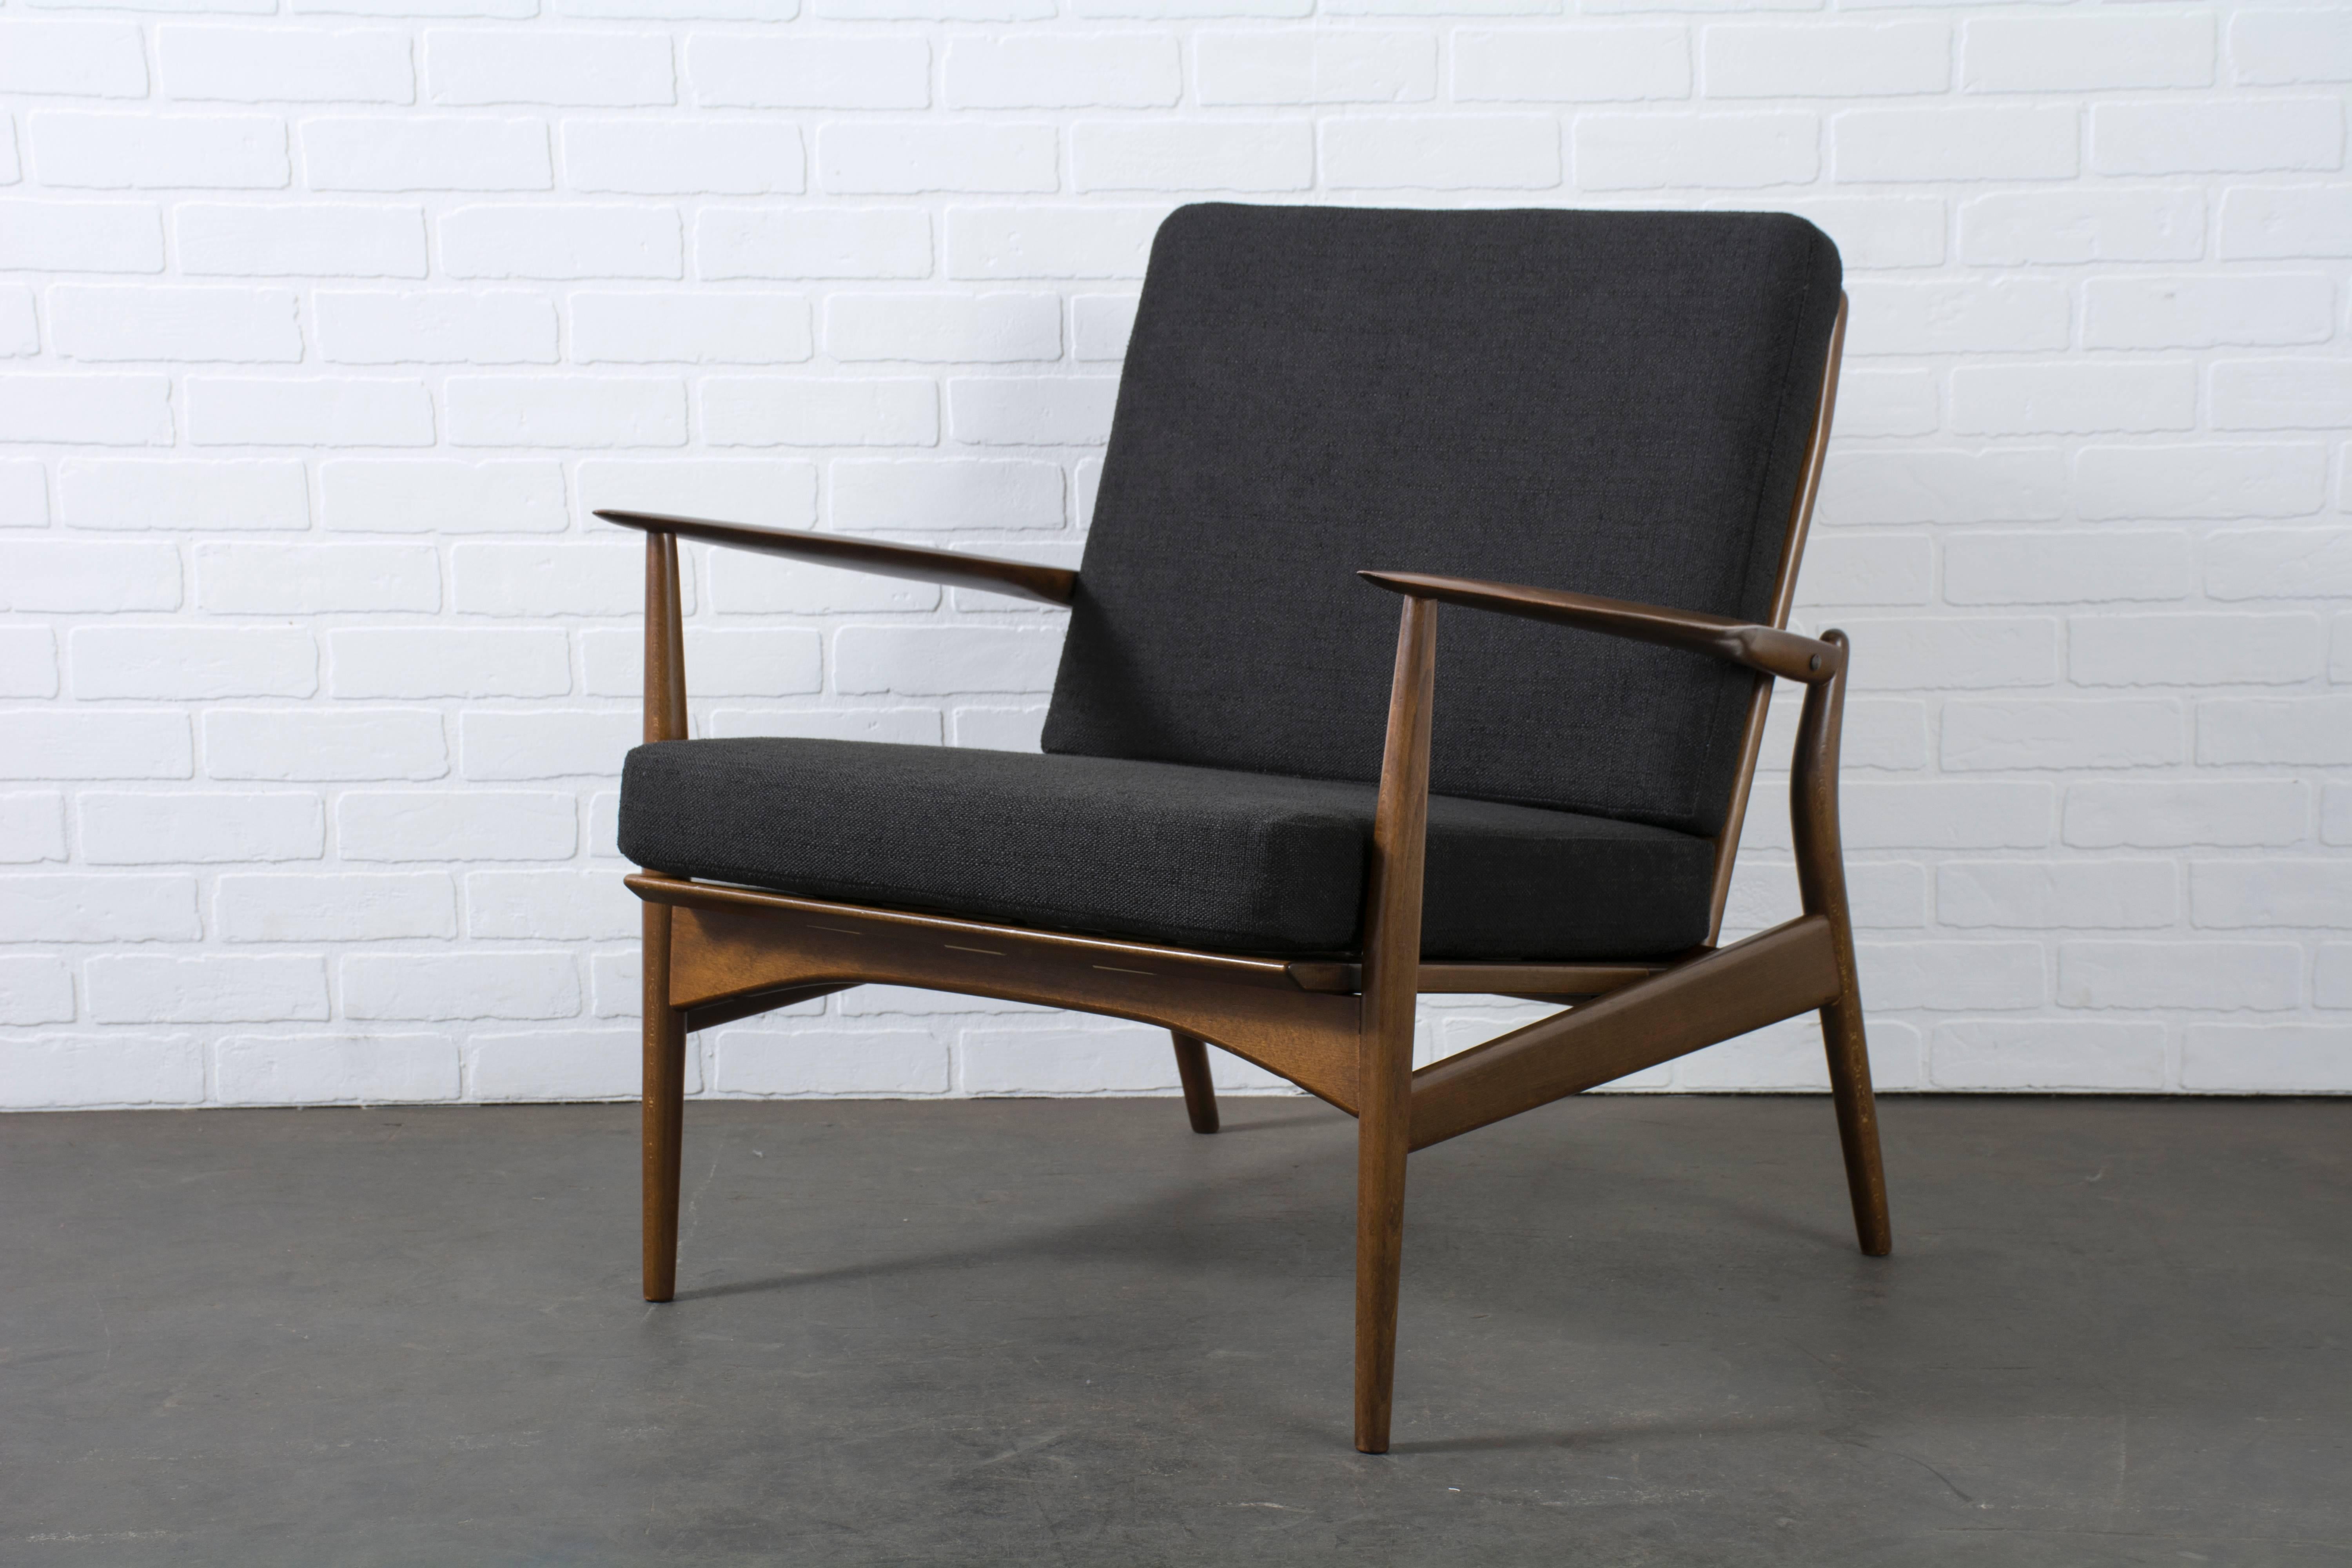 This vintage Mid-Century 'Spear' chair was designed by Ib Kofod-Larsen for Selig (Model #544-15) in the 1960s. It has a sculptural frame with a walnut finish and cane back. New black upholstered cushions.